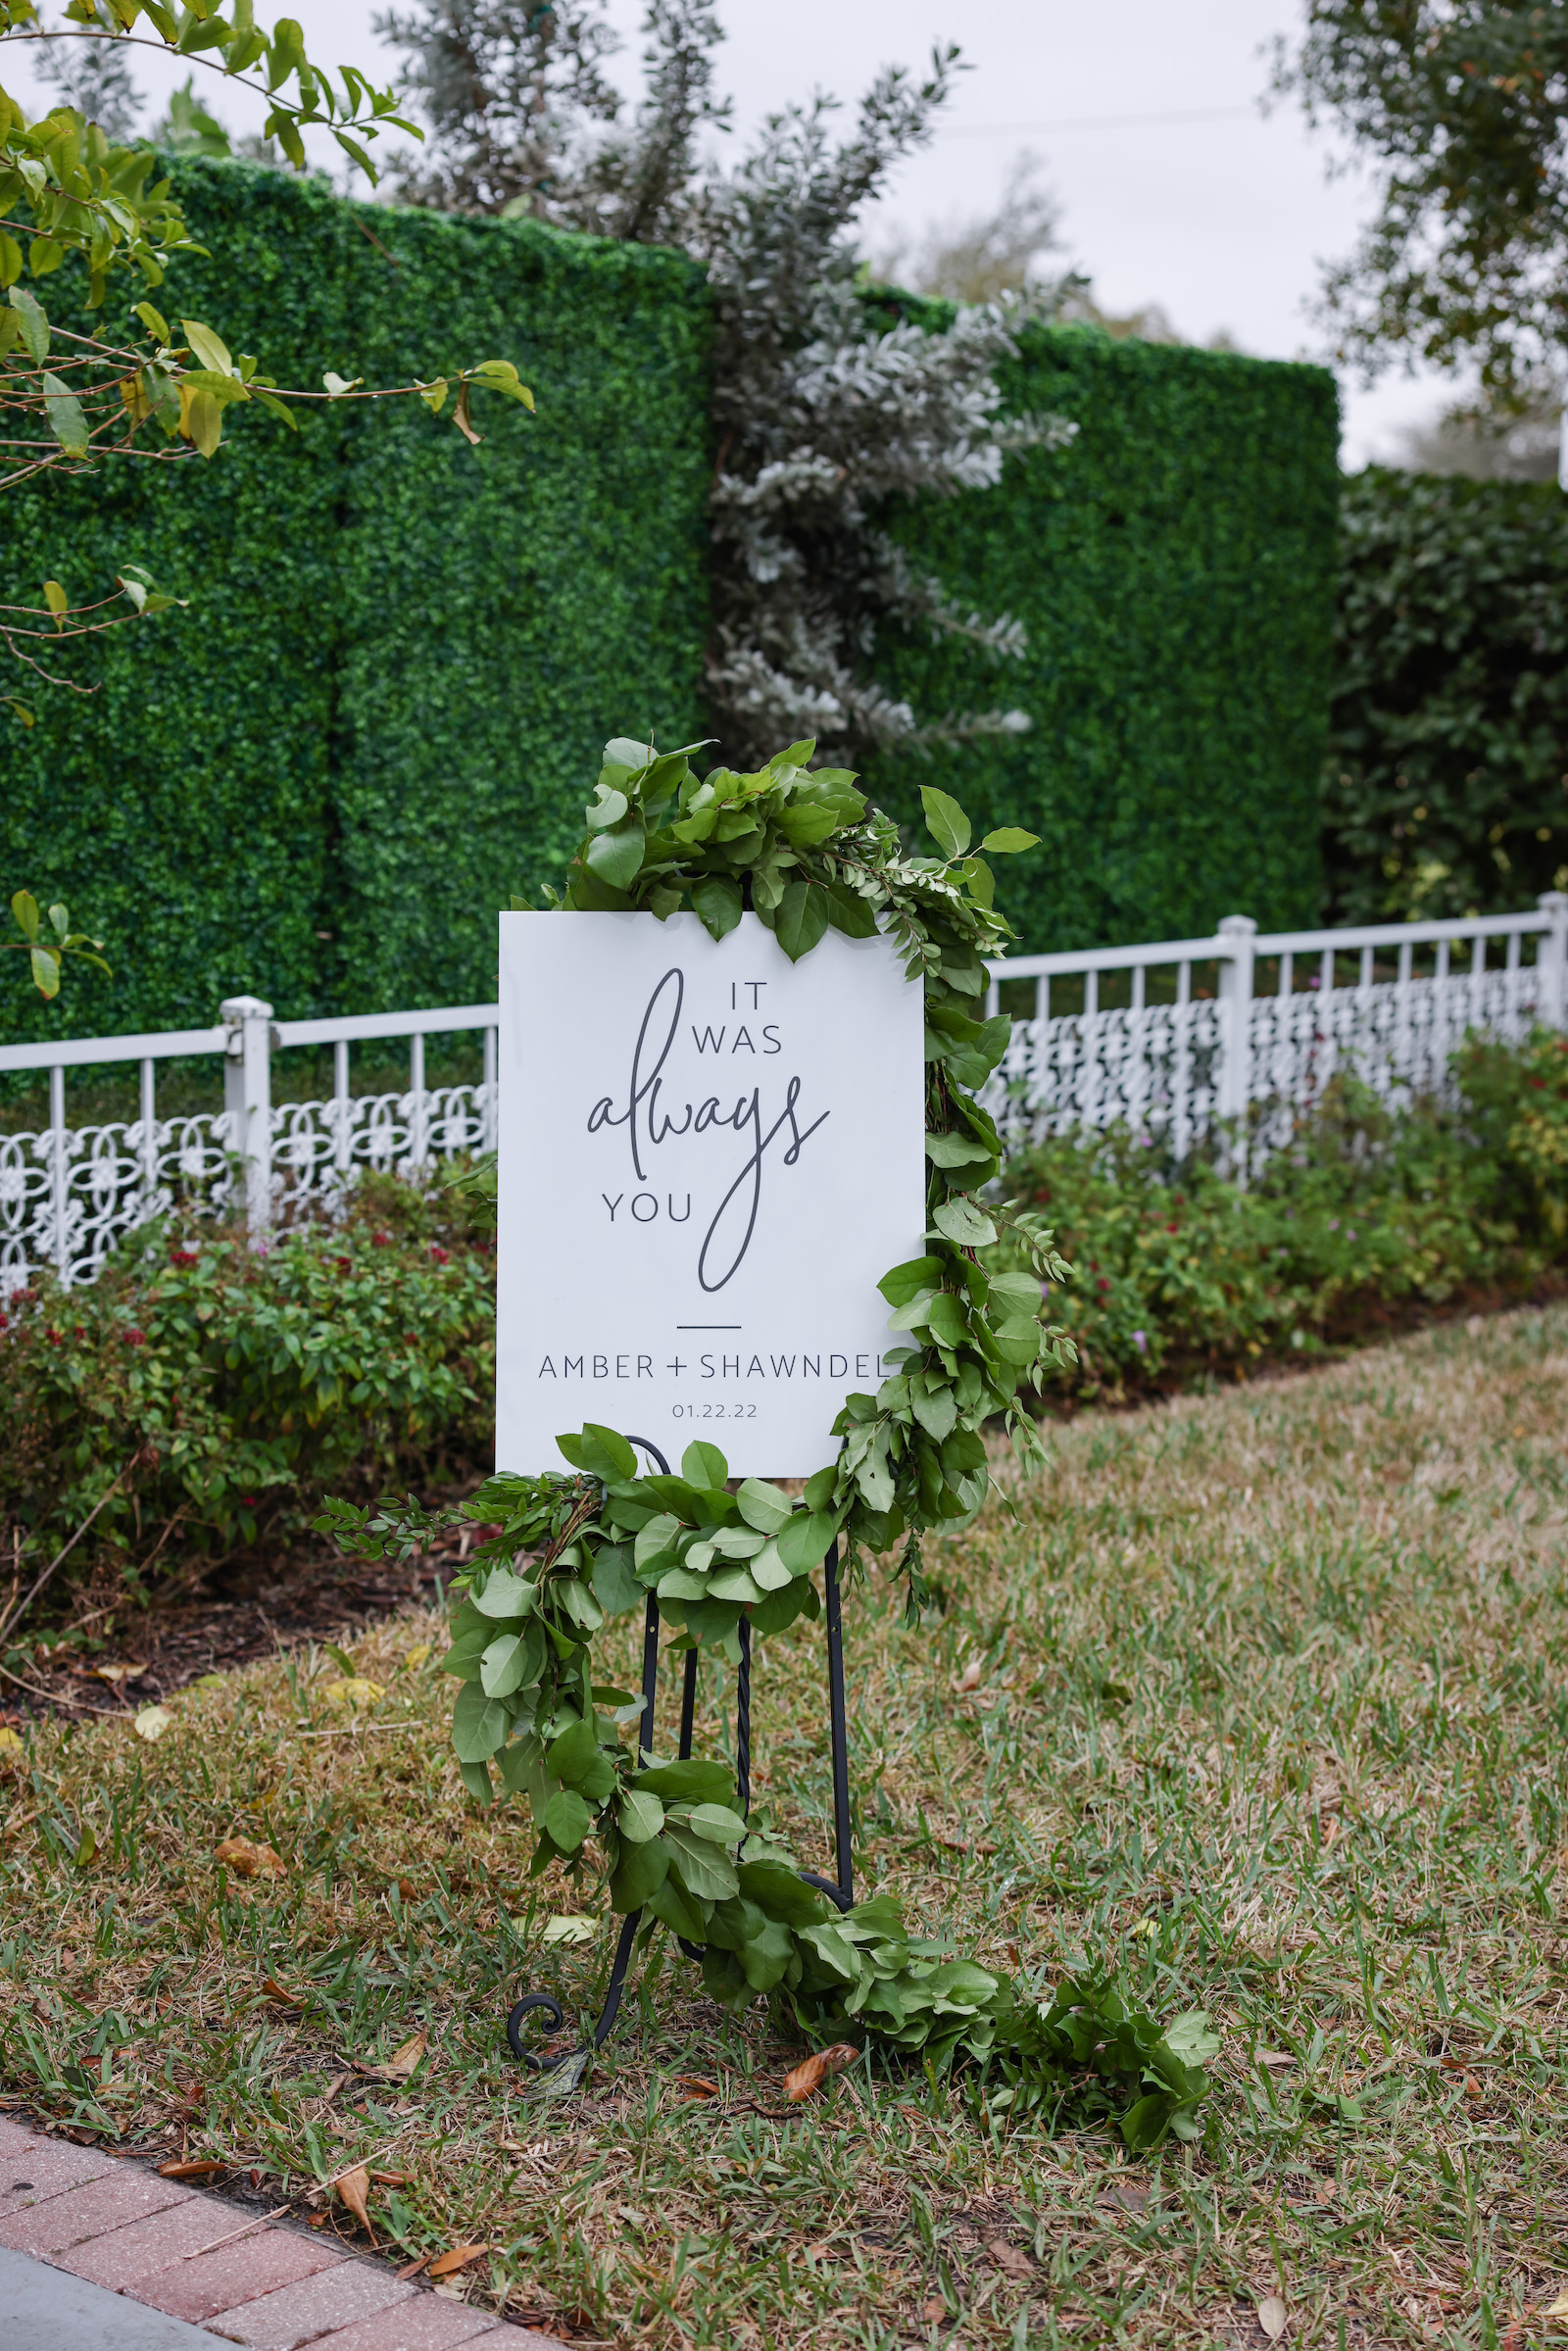 Modern Romantic Black and White Wedding Ceremony Decor, White Welcome Sign "It Was Always You" | Tampa Bay Wedding Photographer Lifelong Photography Studio